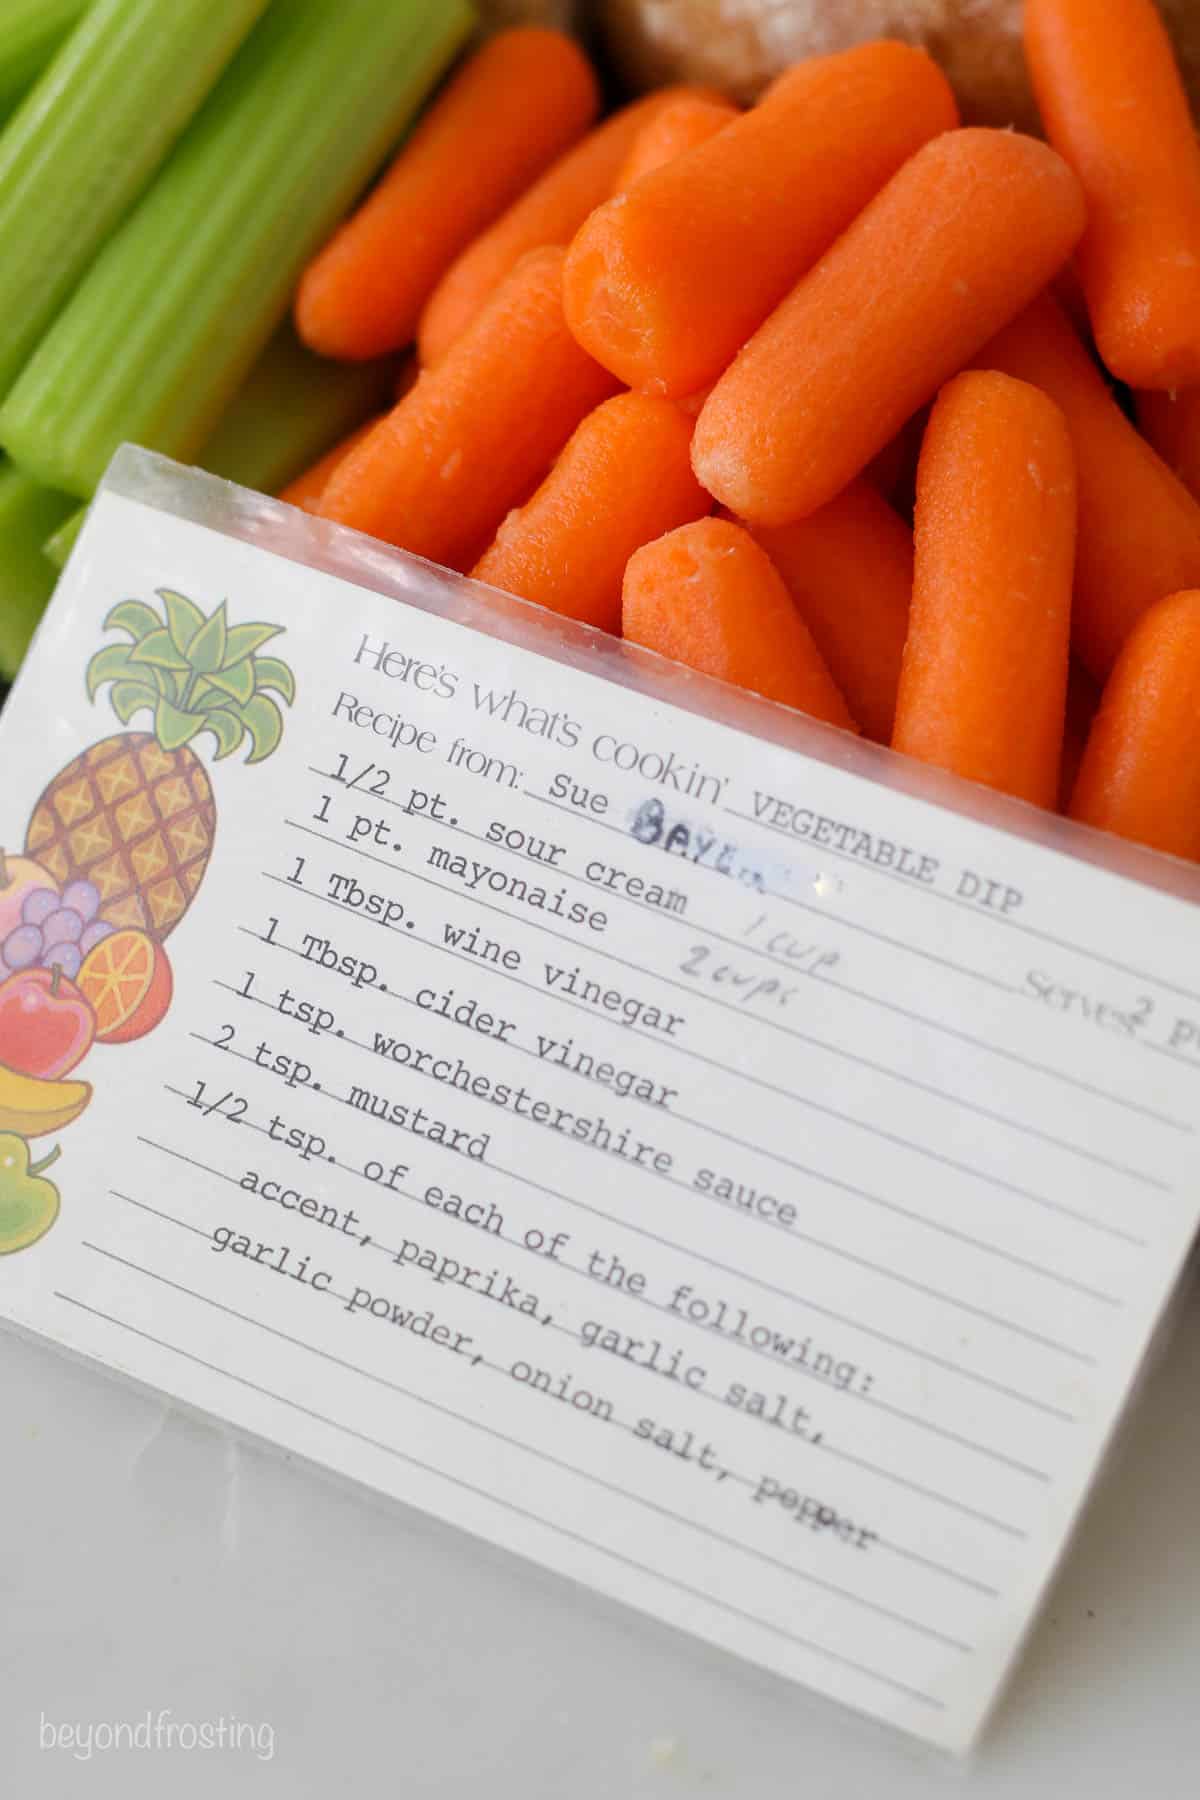 A hand-written recipe card in front of carrots and celery